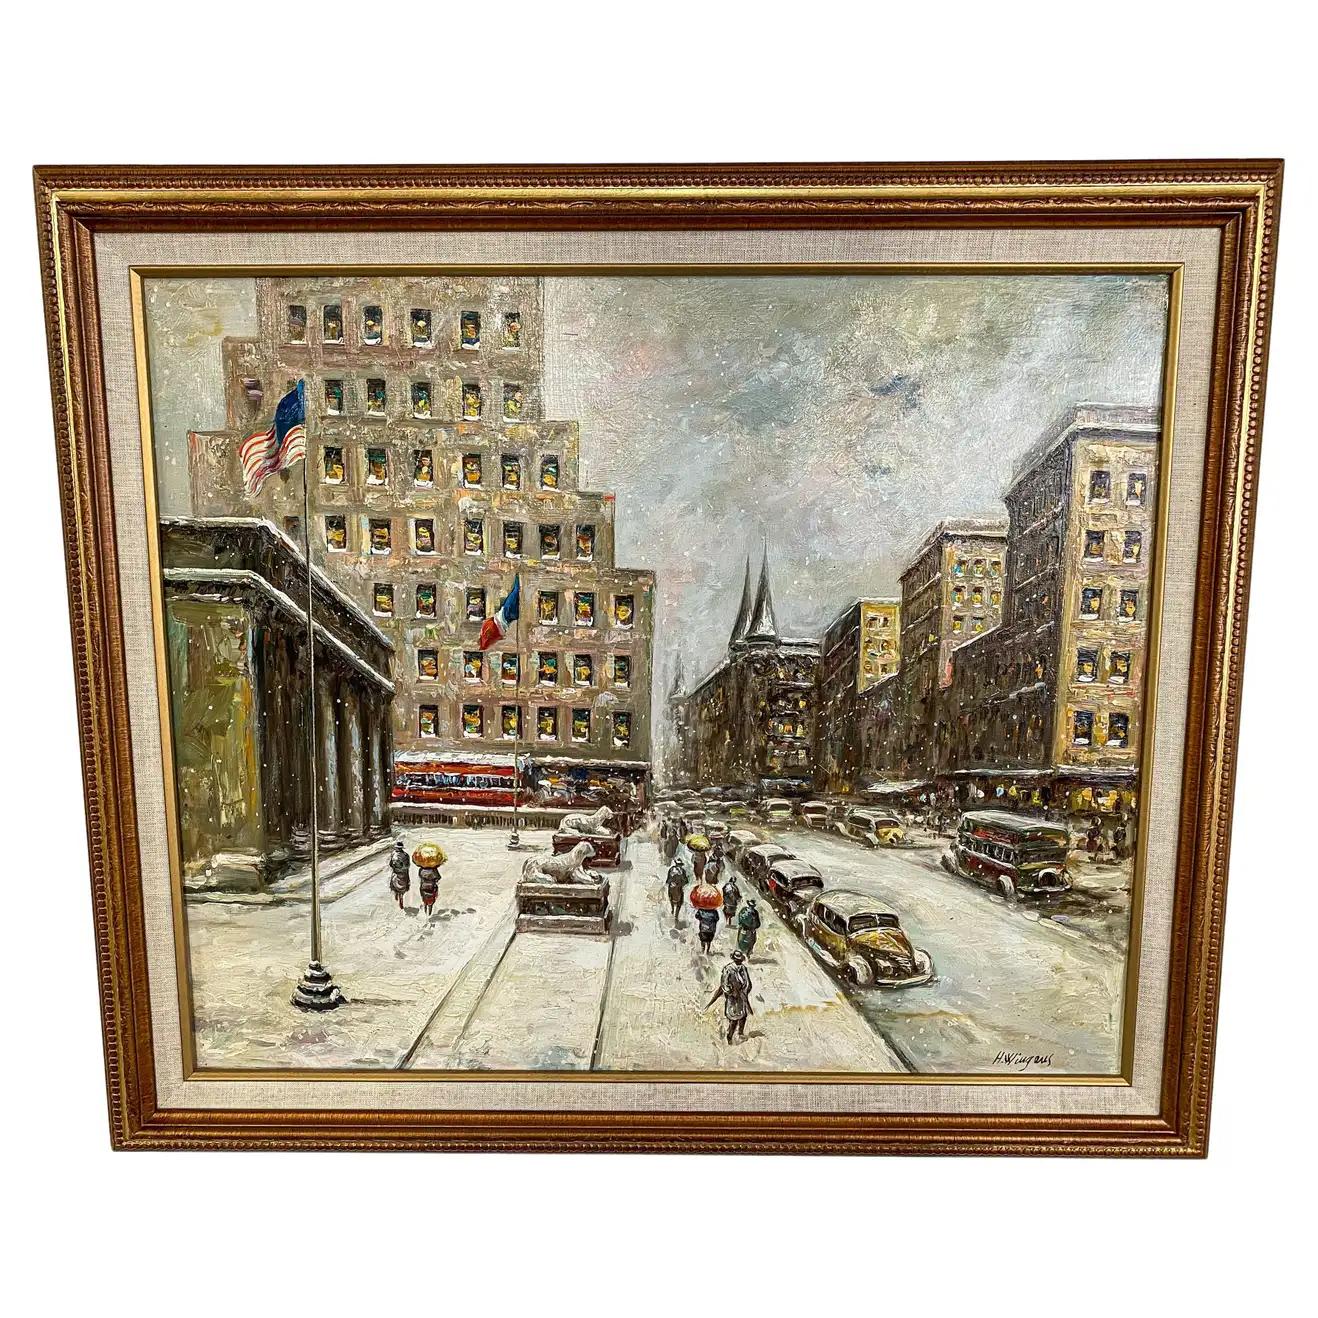 H.Wigens Landscape Painting - City Scape Oil on Canvas Painting Signed and Framed in the Manner of Guy Carleto